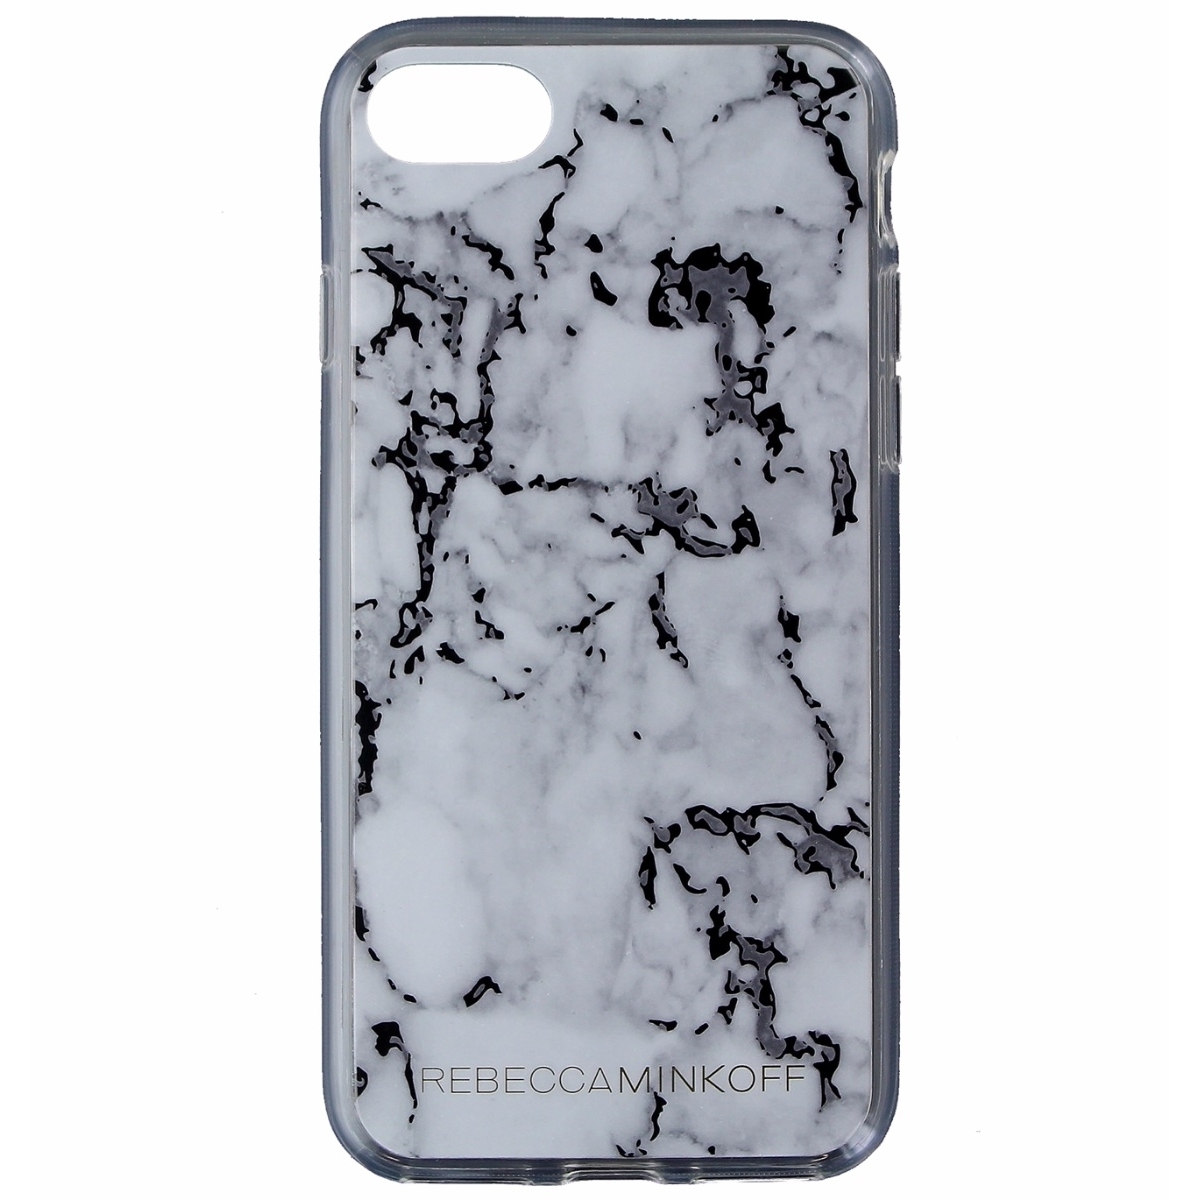 Rebecca Minkoff Protection Case Cover IPhone 8 / 7 - Marble Print / Black Foil